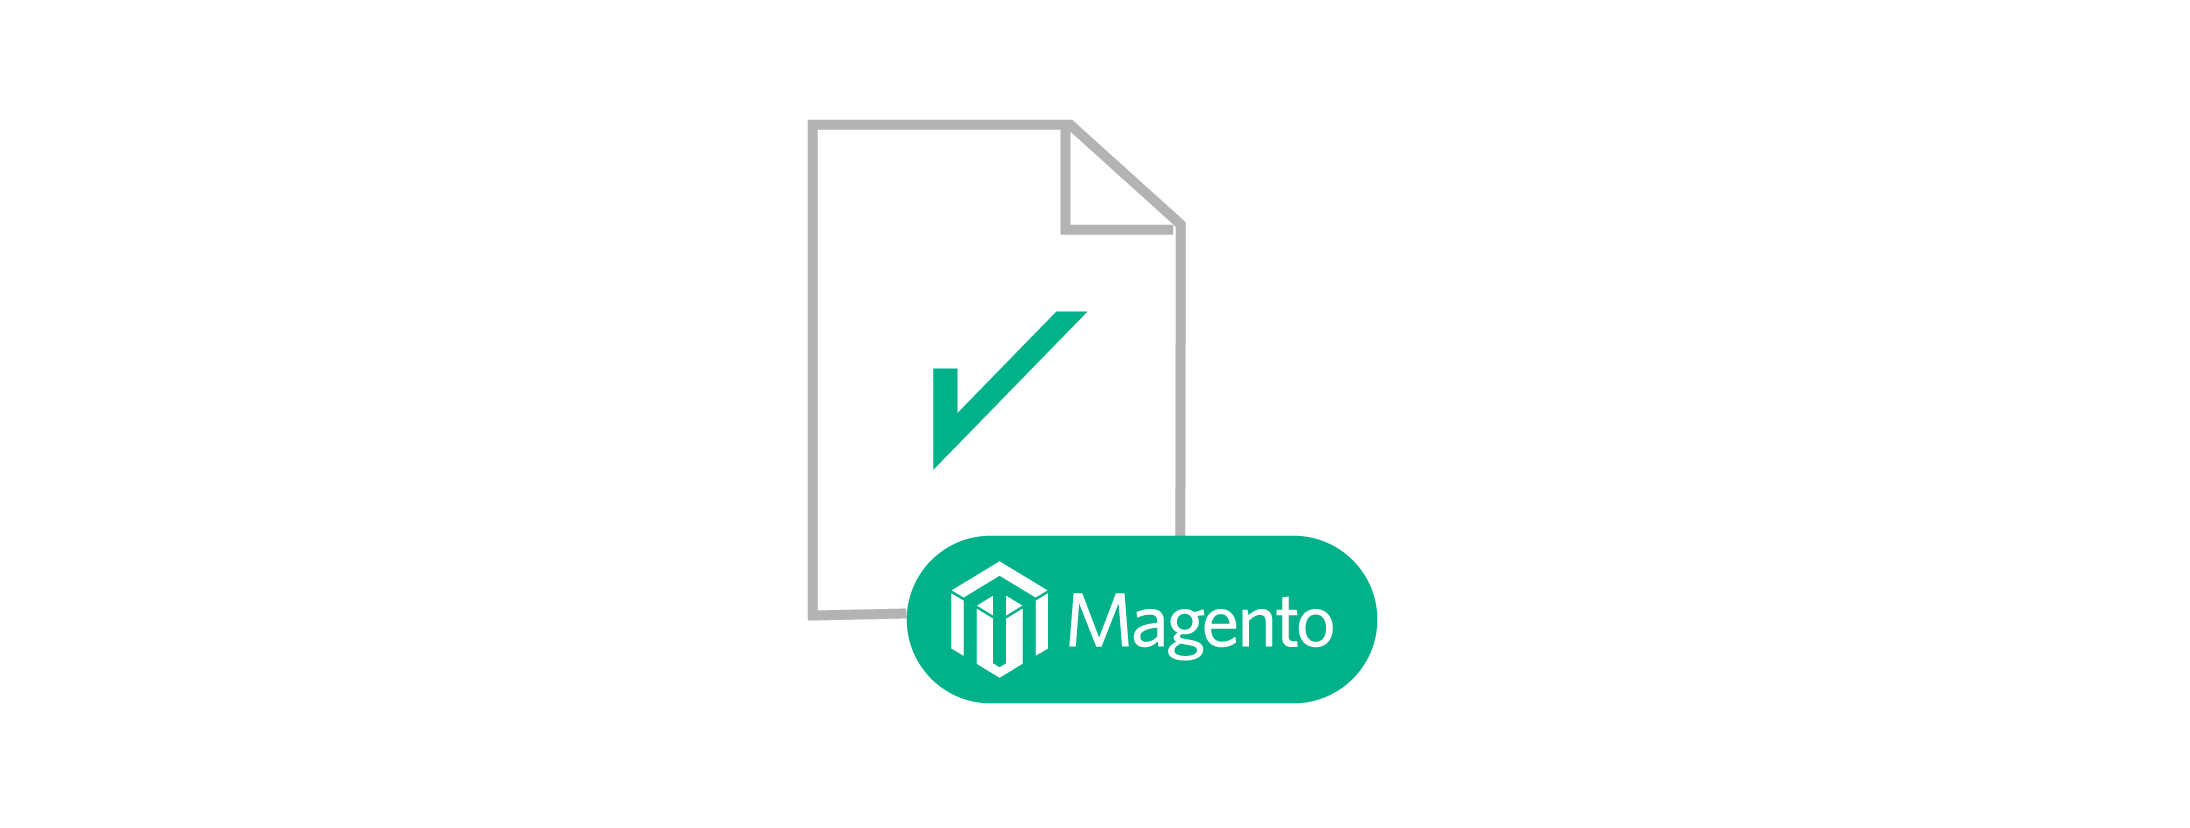 Magento Fraud Protection by Riskified